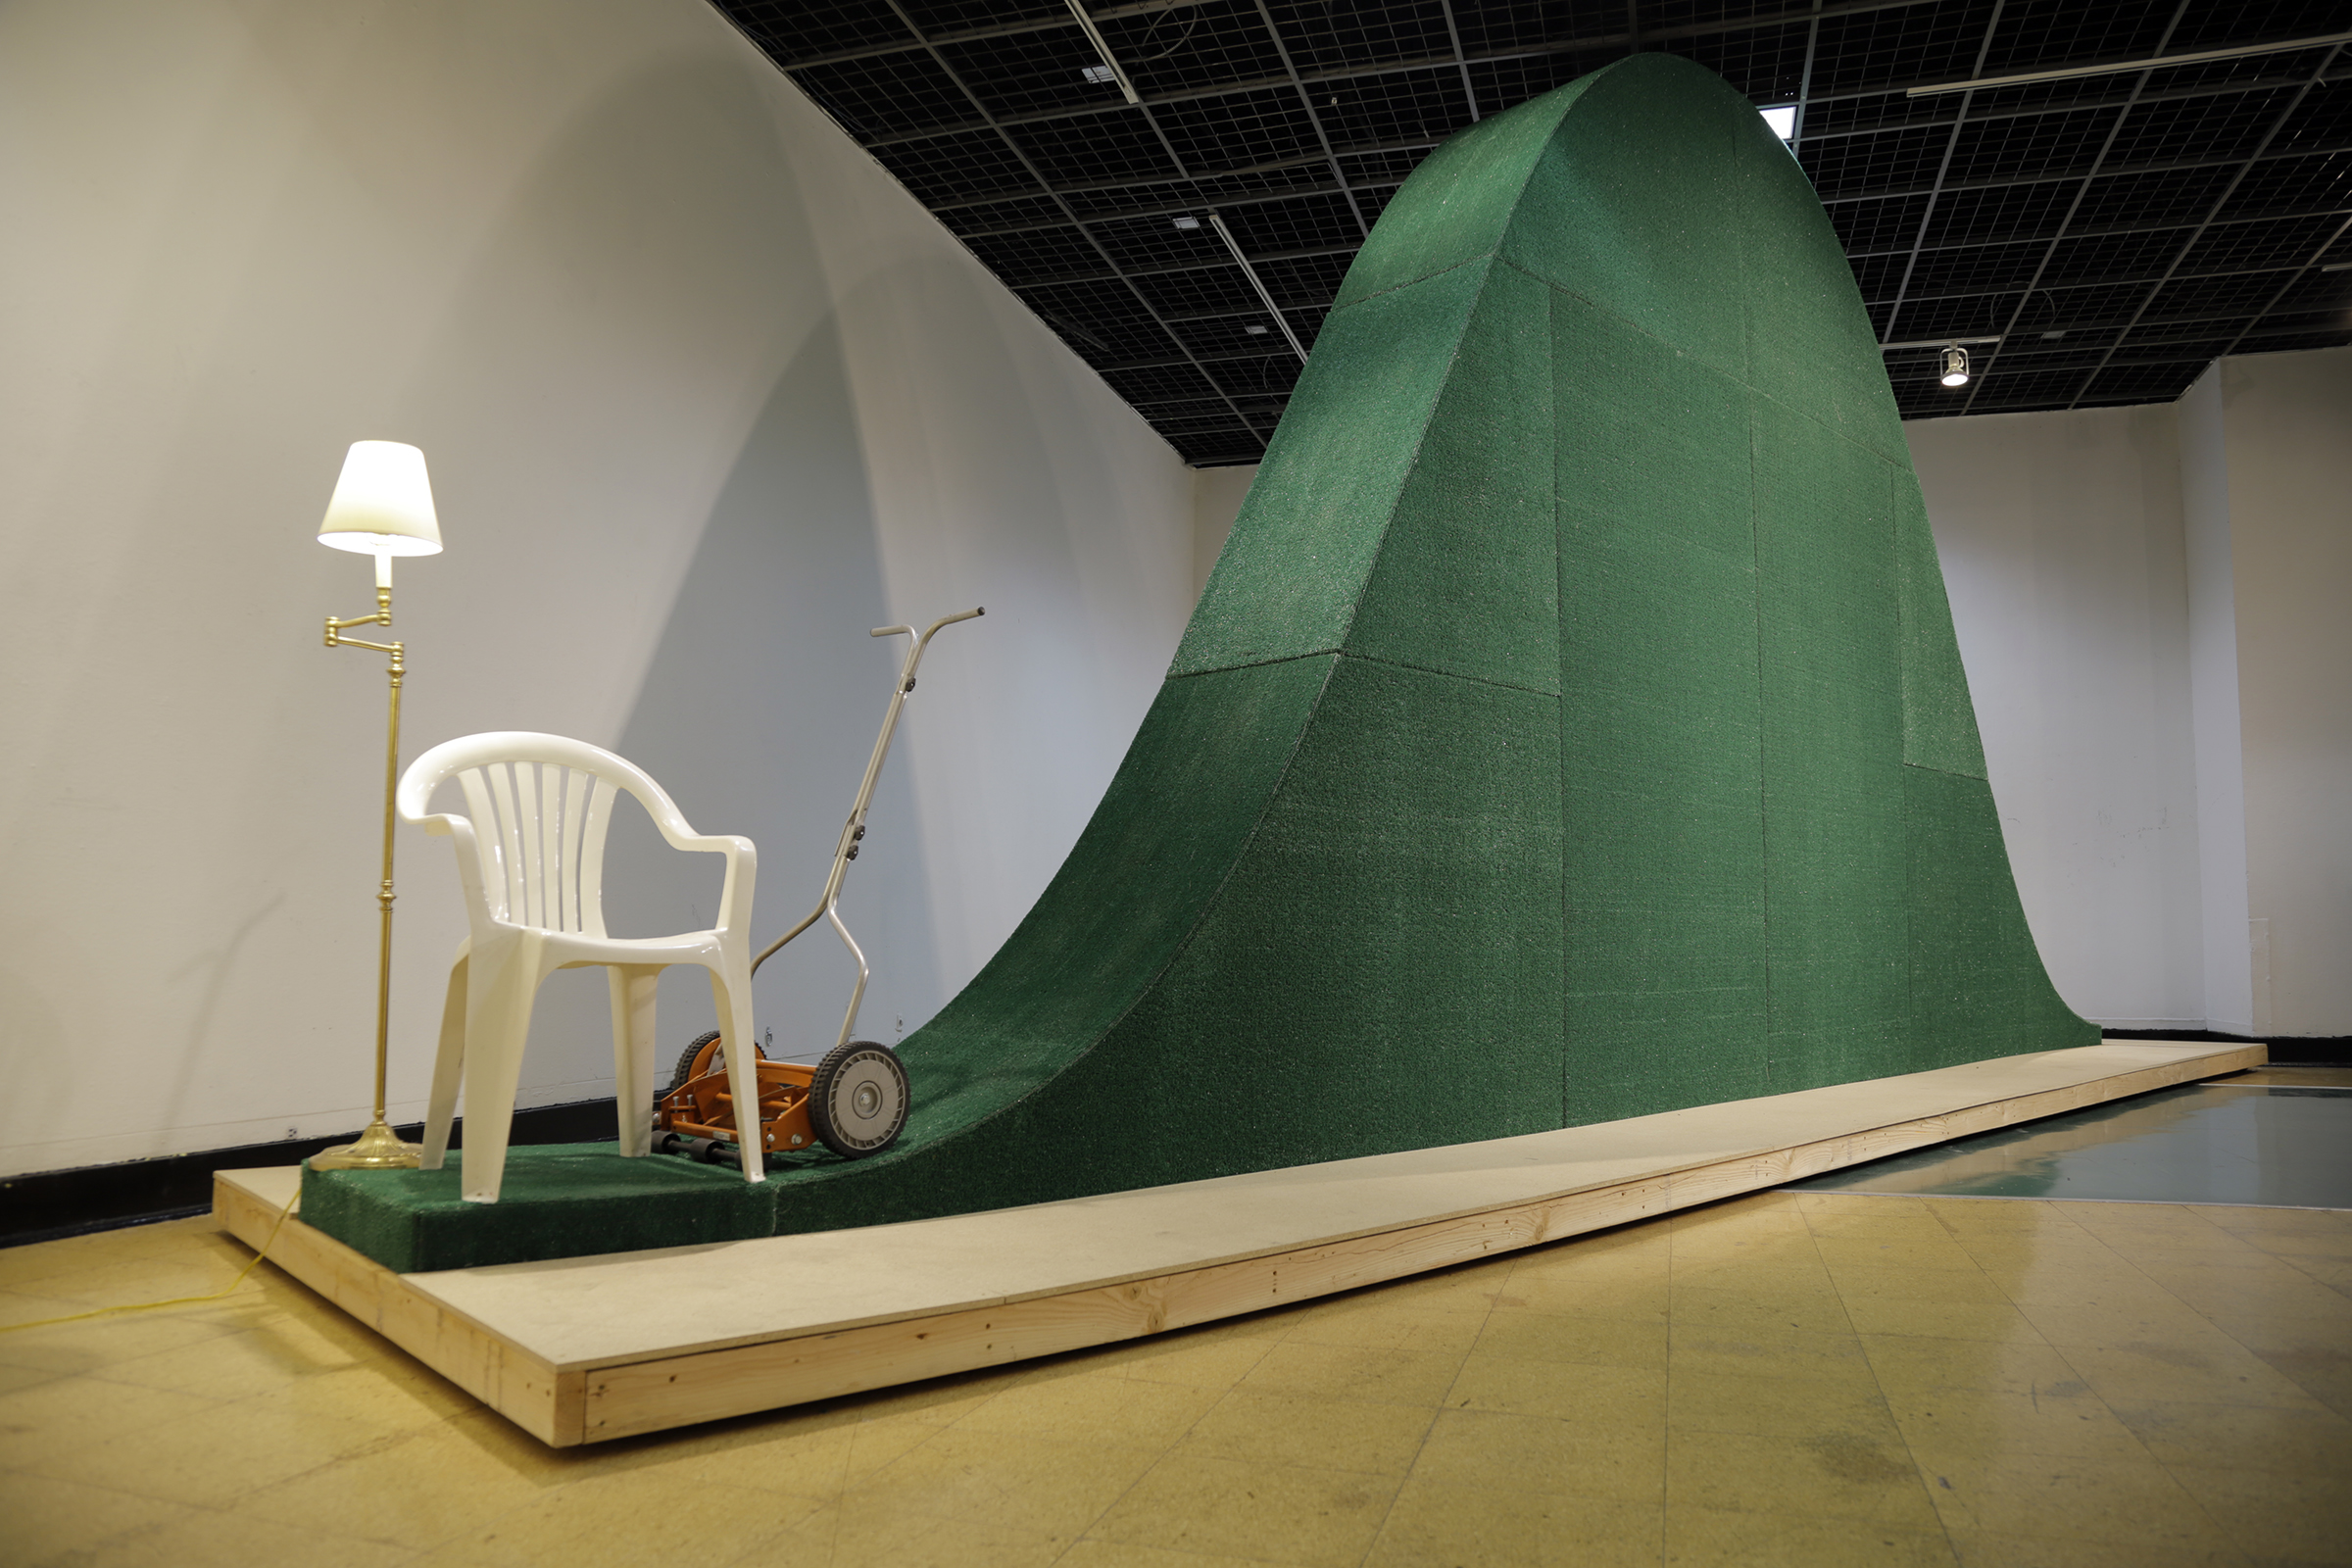 A close-up photograph of white plastic lawn chair, floor lamp, and push reel mower next to a large, green, bell-curve shaped sculpture.